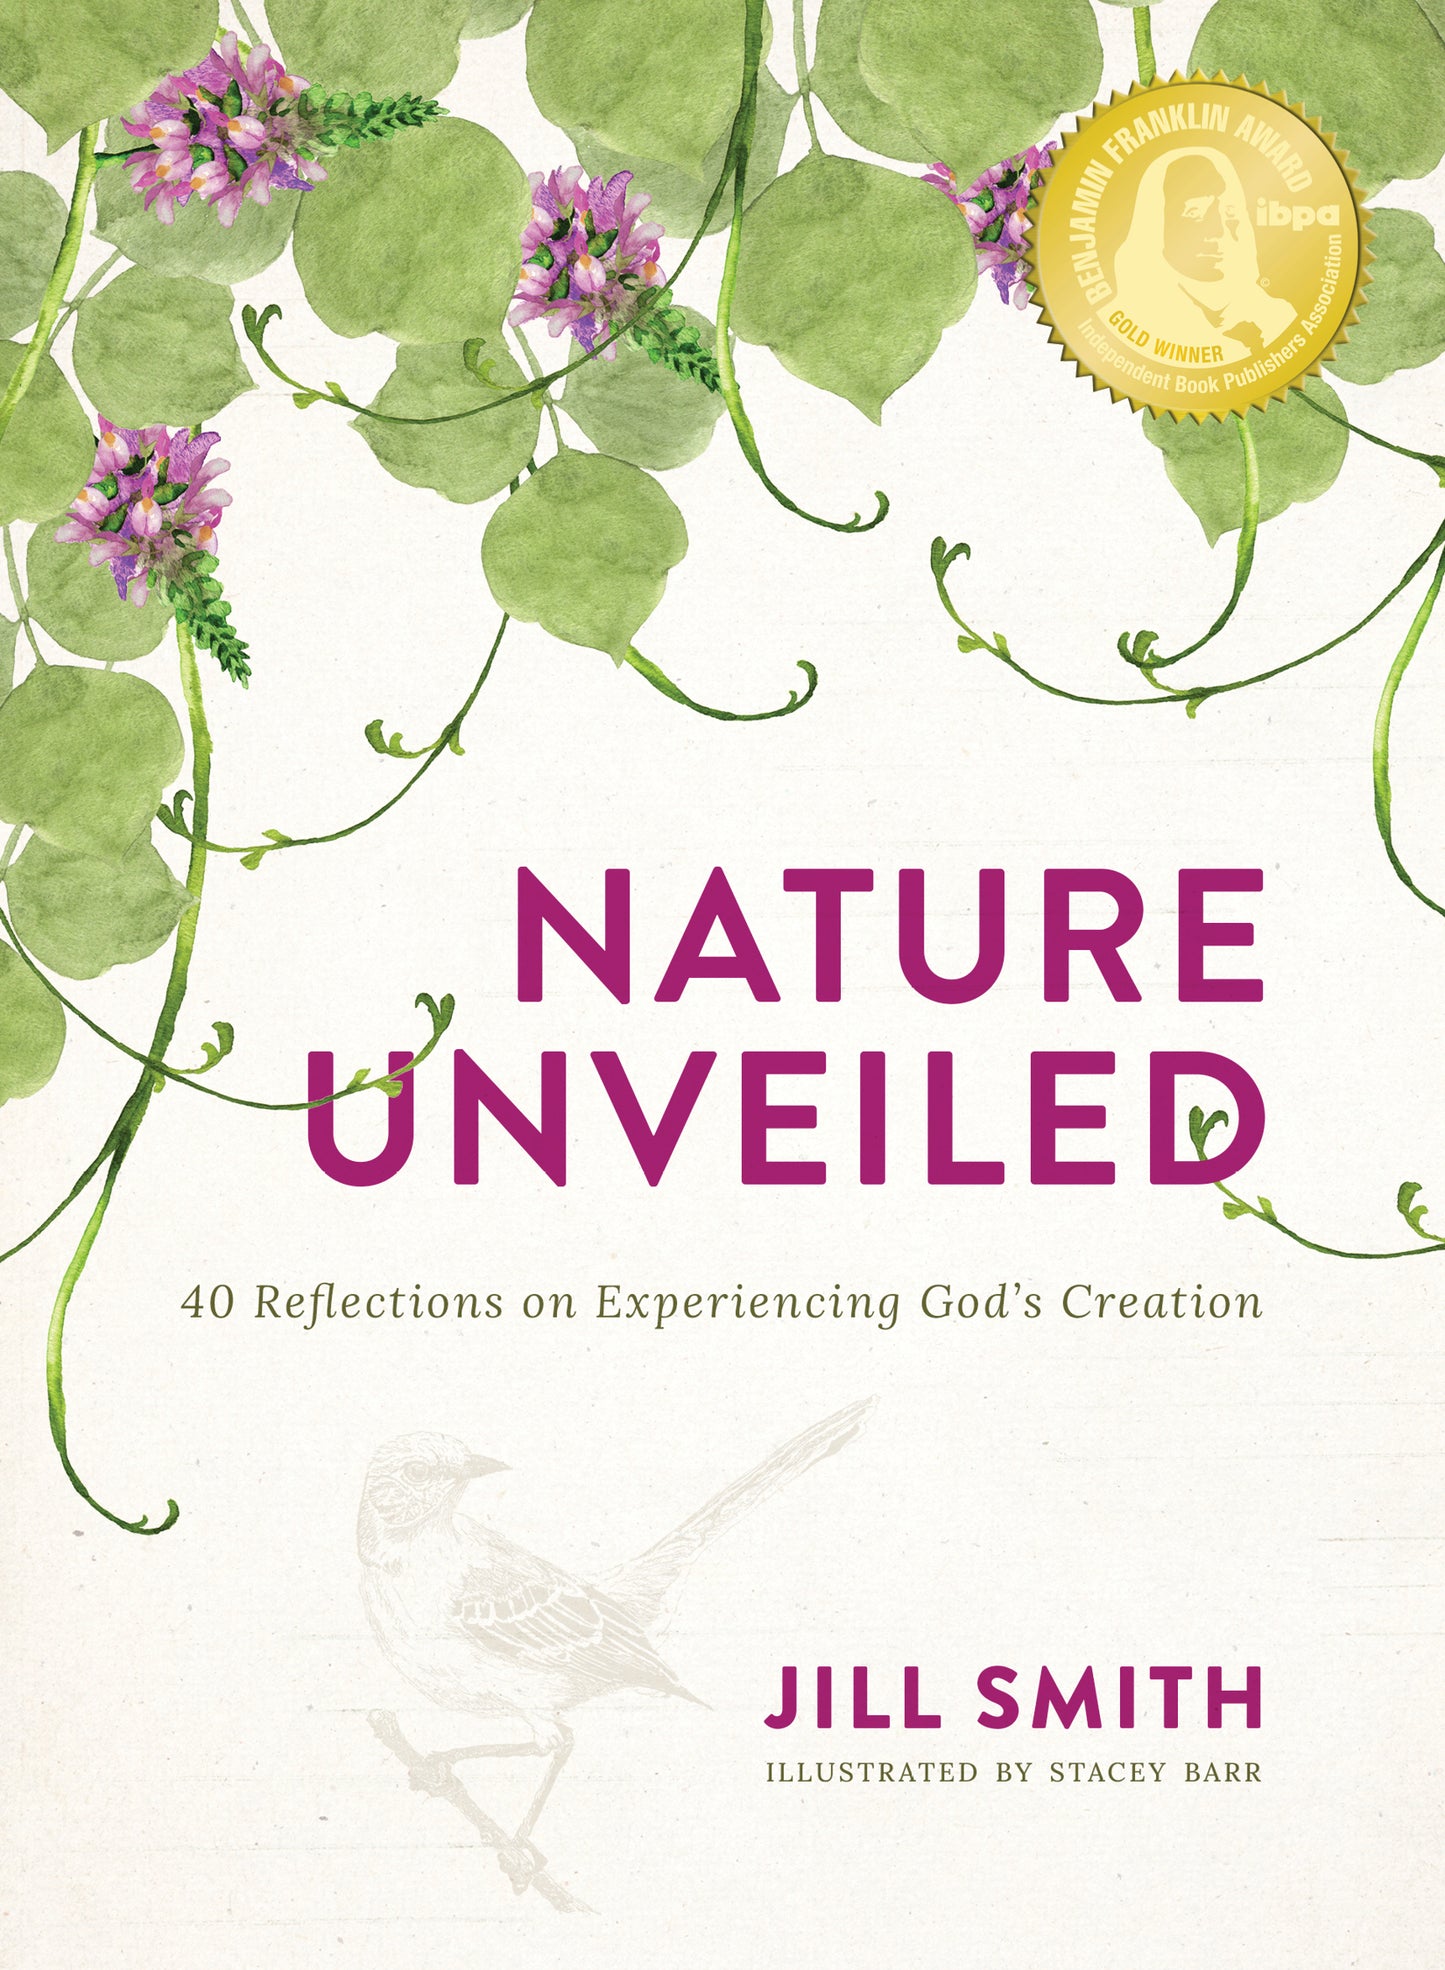 Nature Unveiled: 40 Reflections on Experiencing God’s Creation